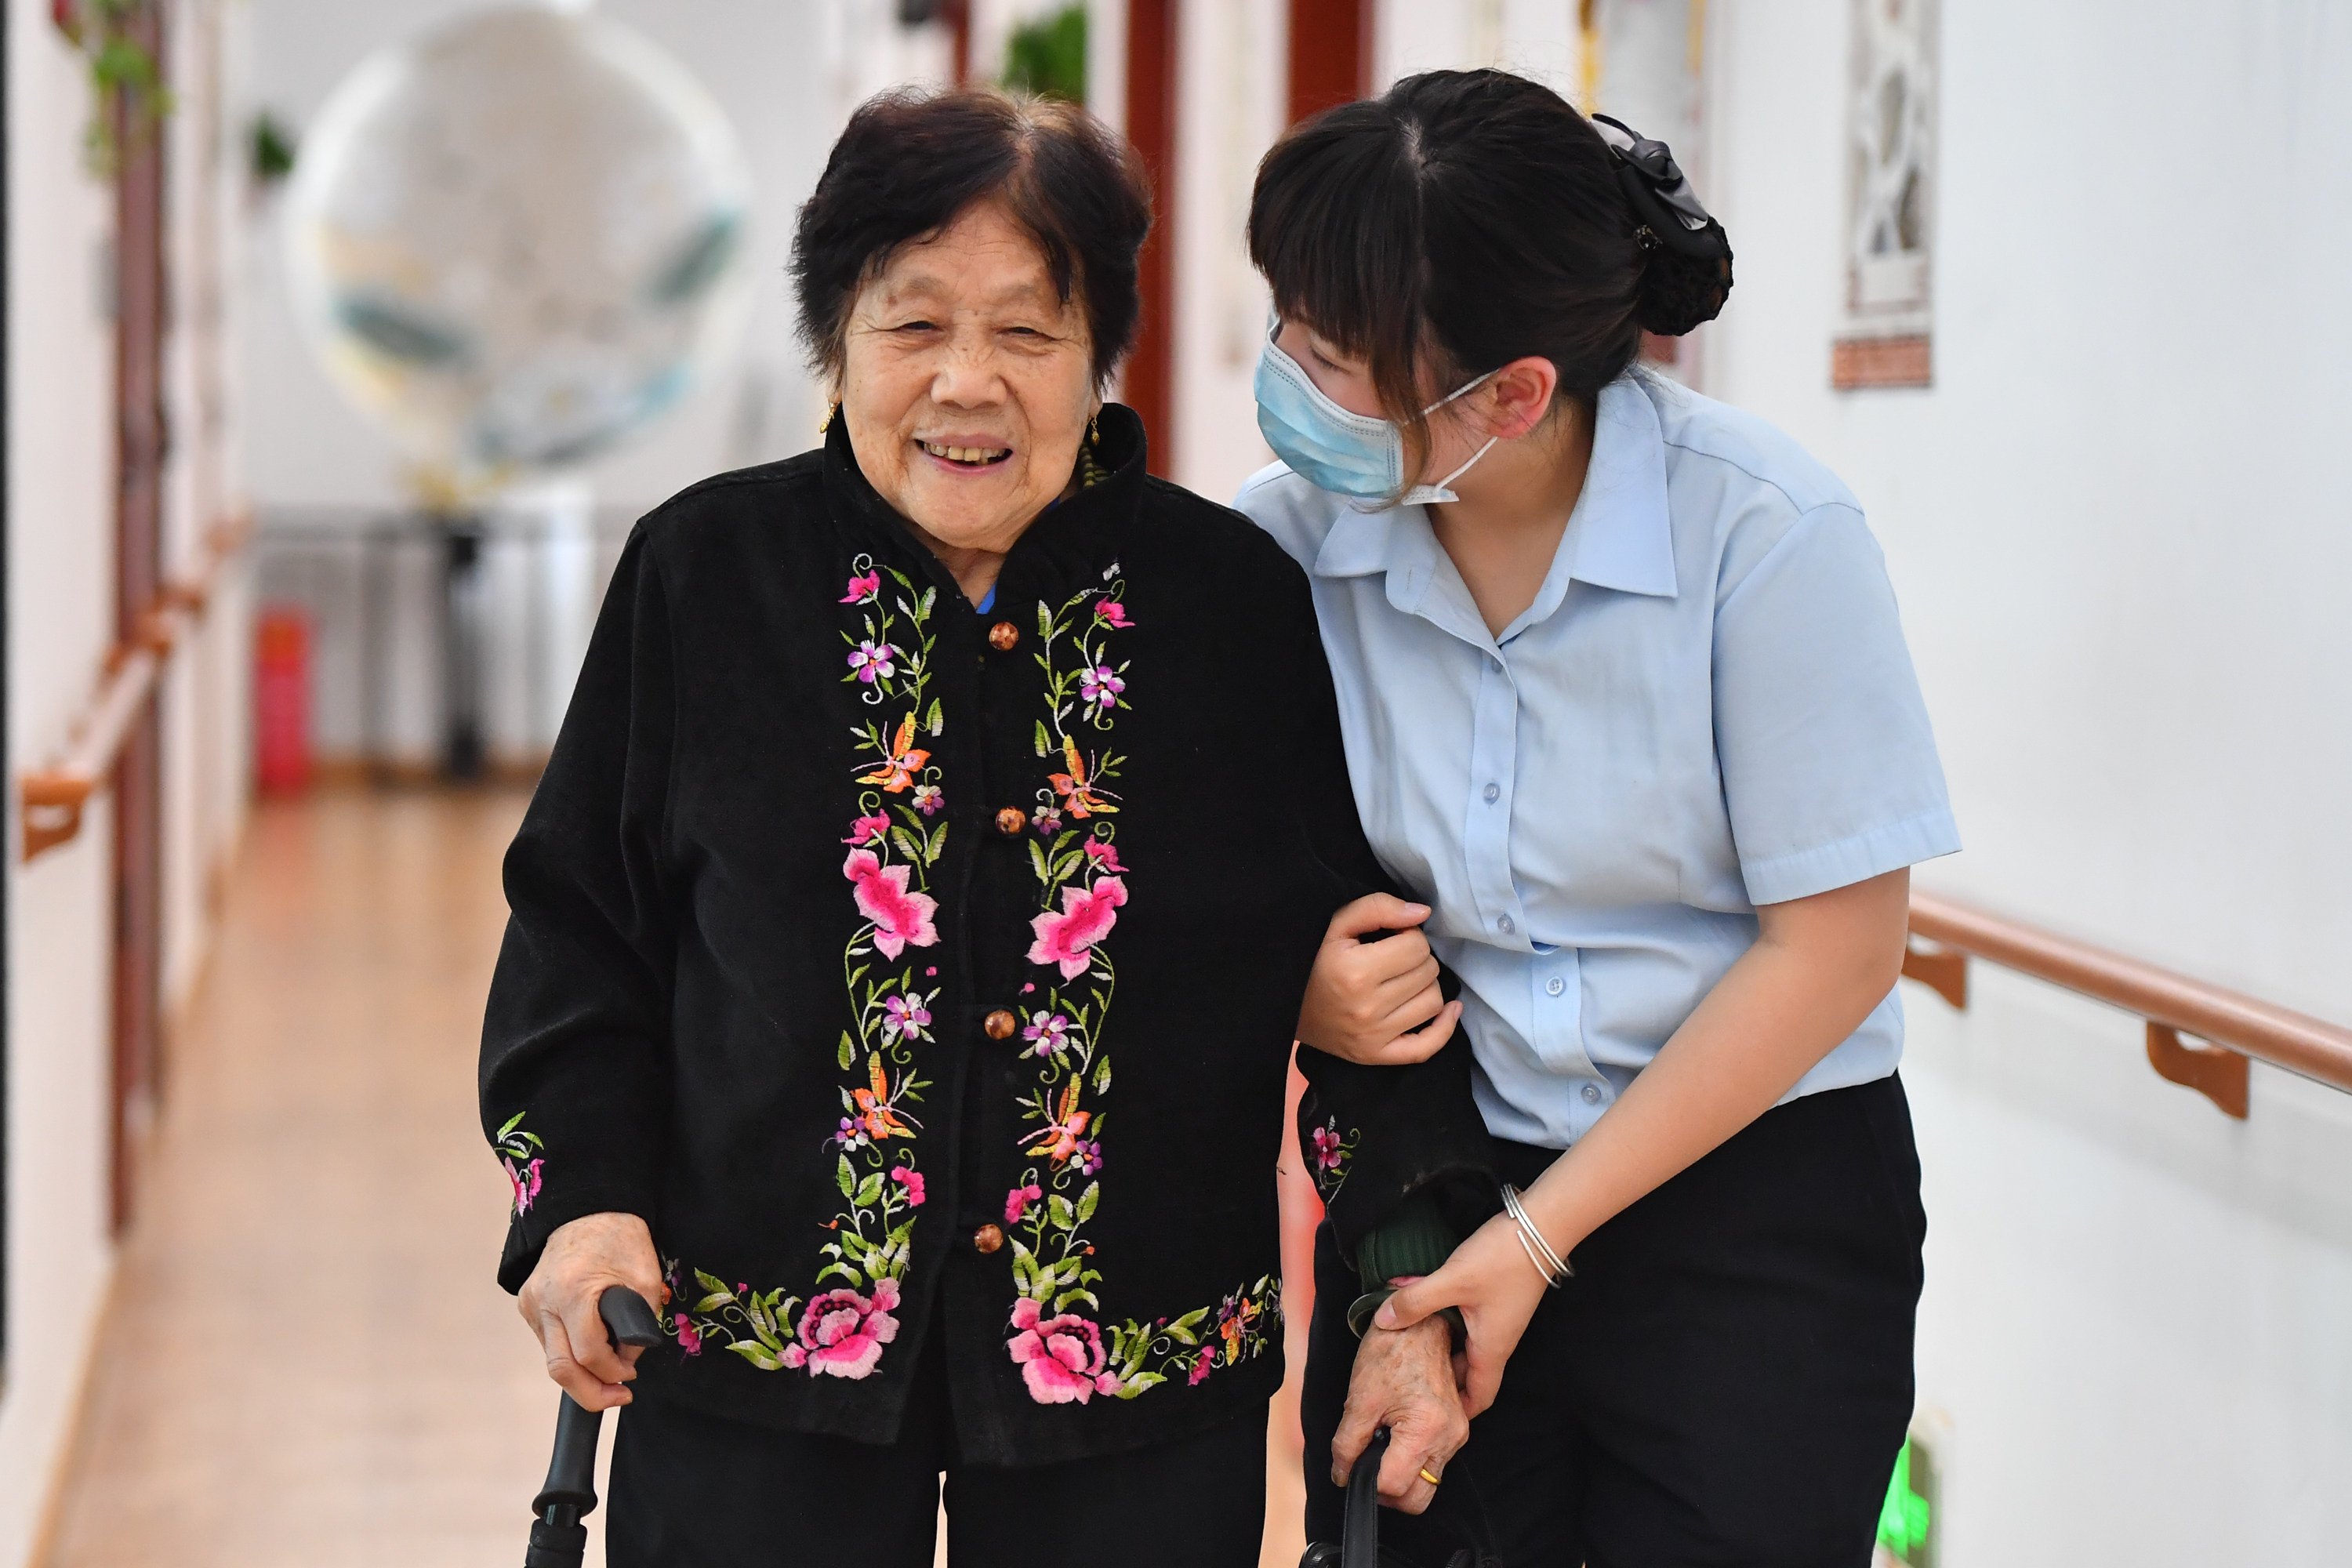 A scientific study in China says it has identified a previously unknown group of cells that surround the spinal cord’s motor neurons and contribute to walking difficulties and other signs of ageing. Photo: Xinhua